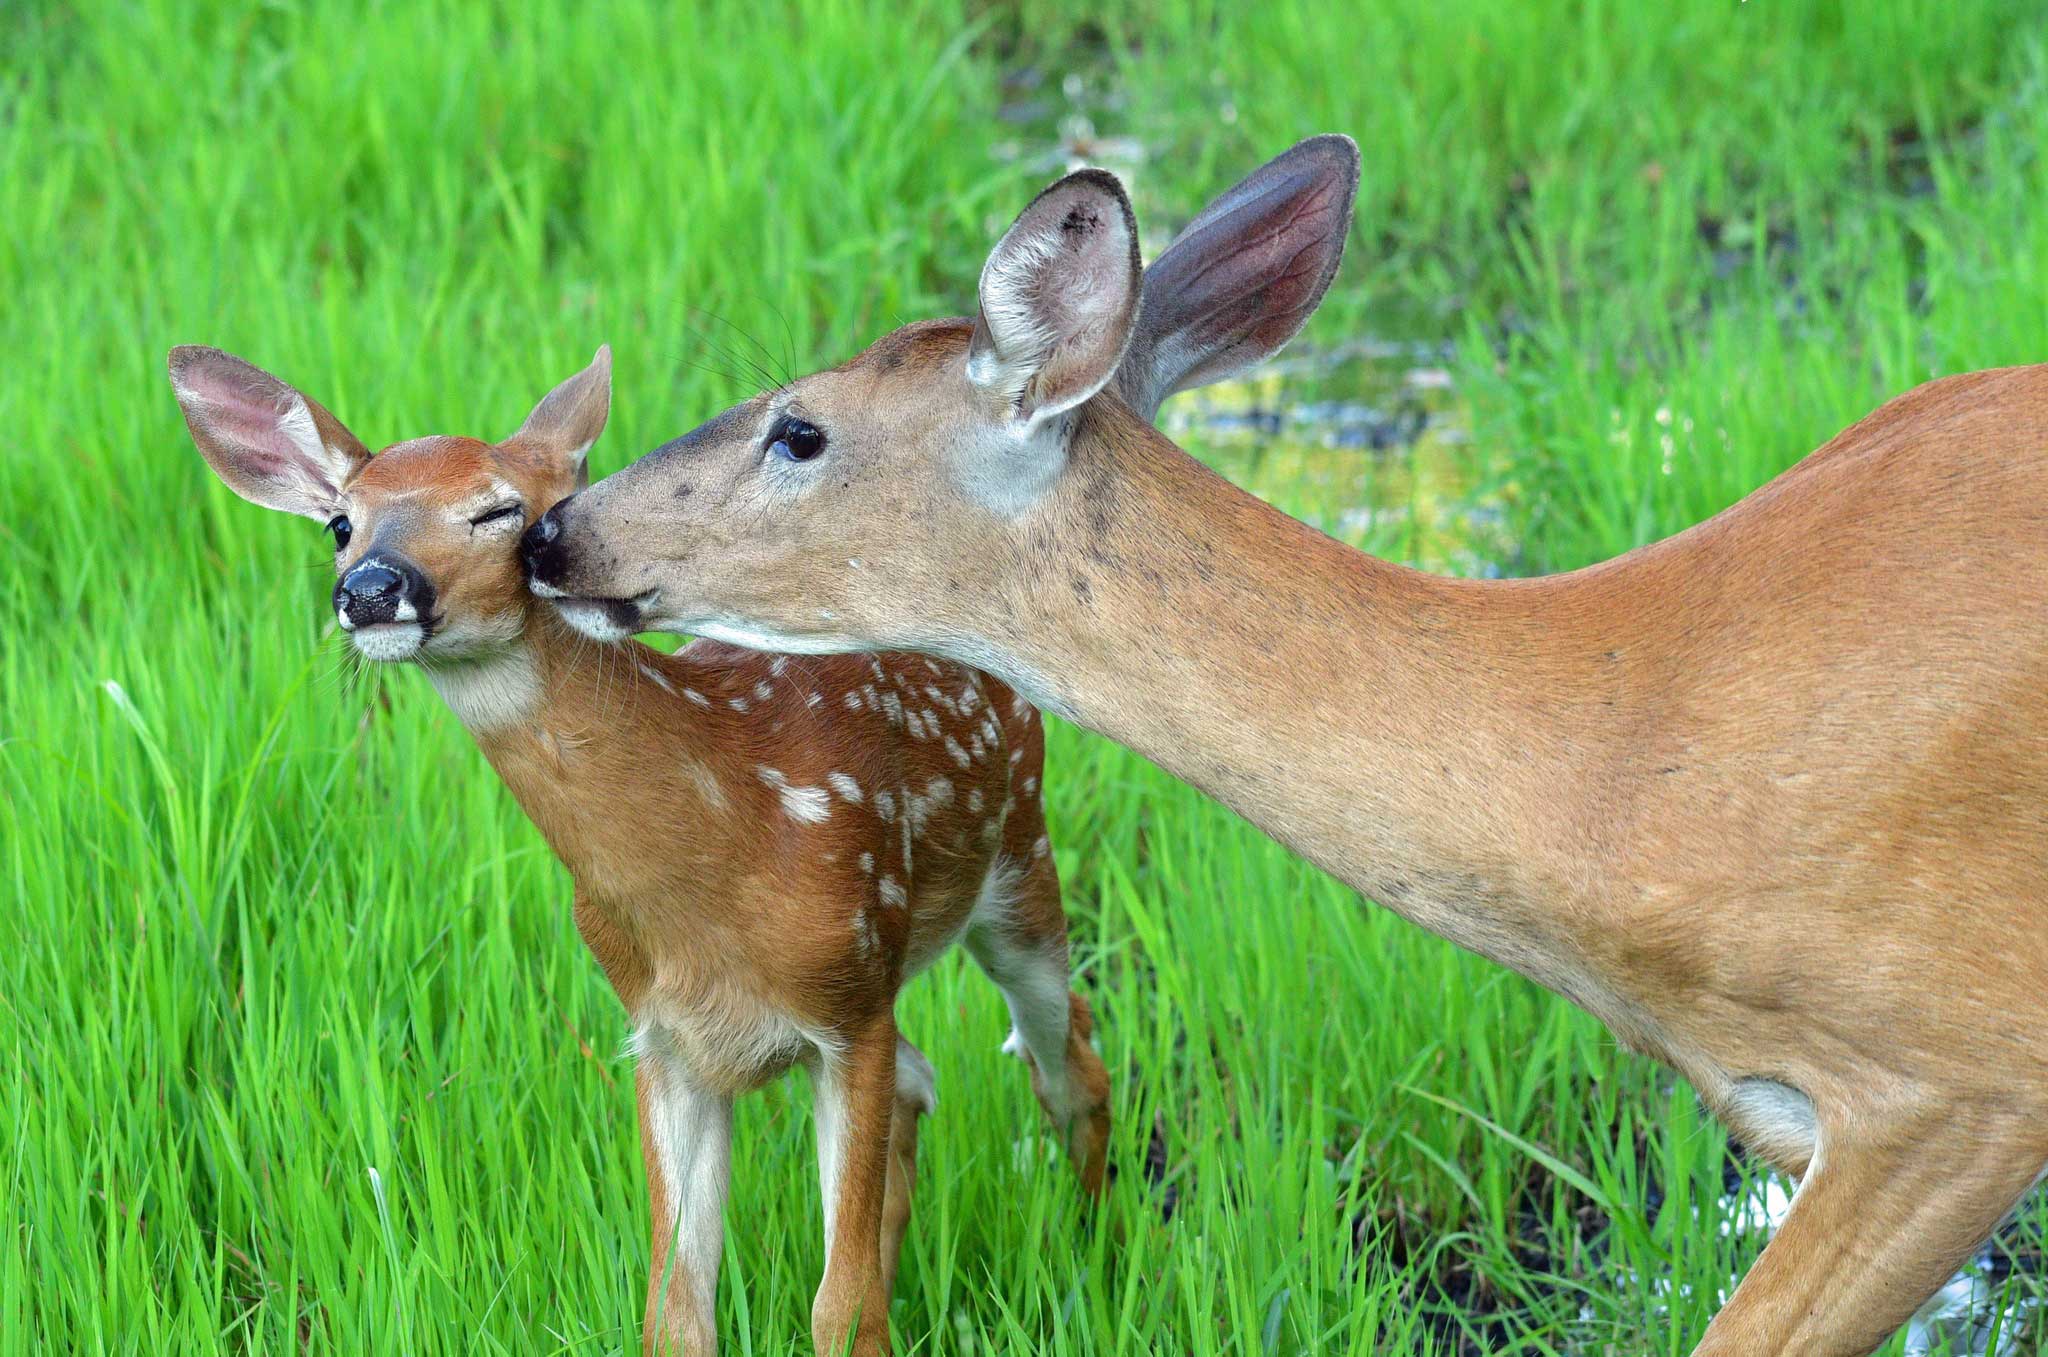 A fawn gets licked by its mother in a field of grass.